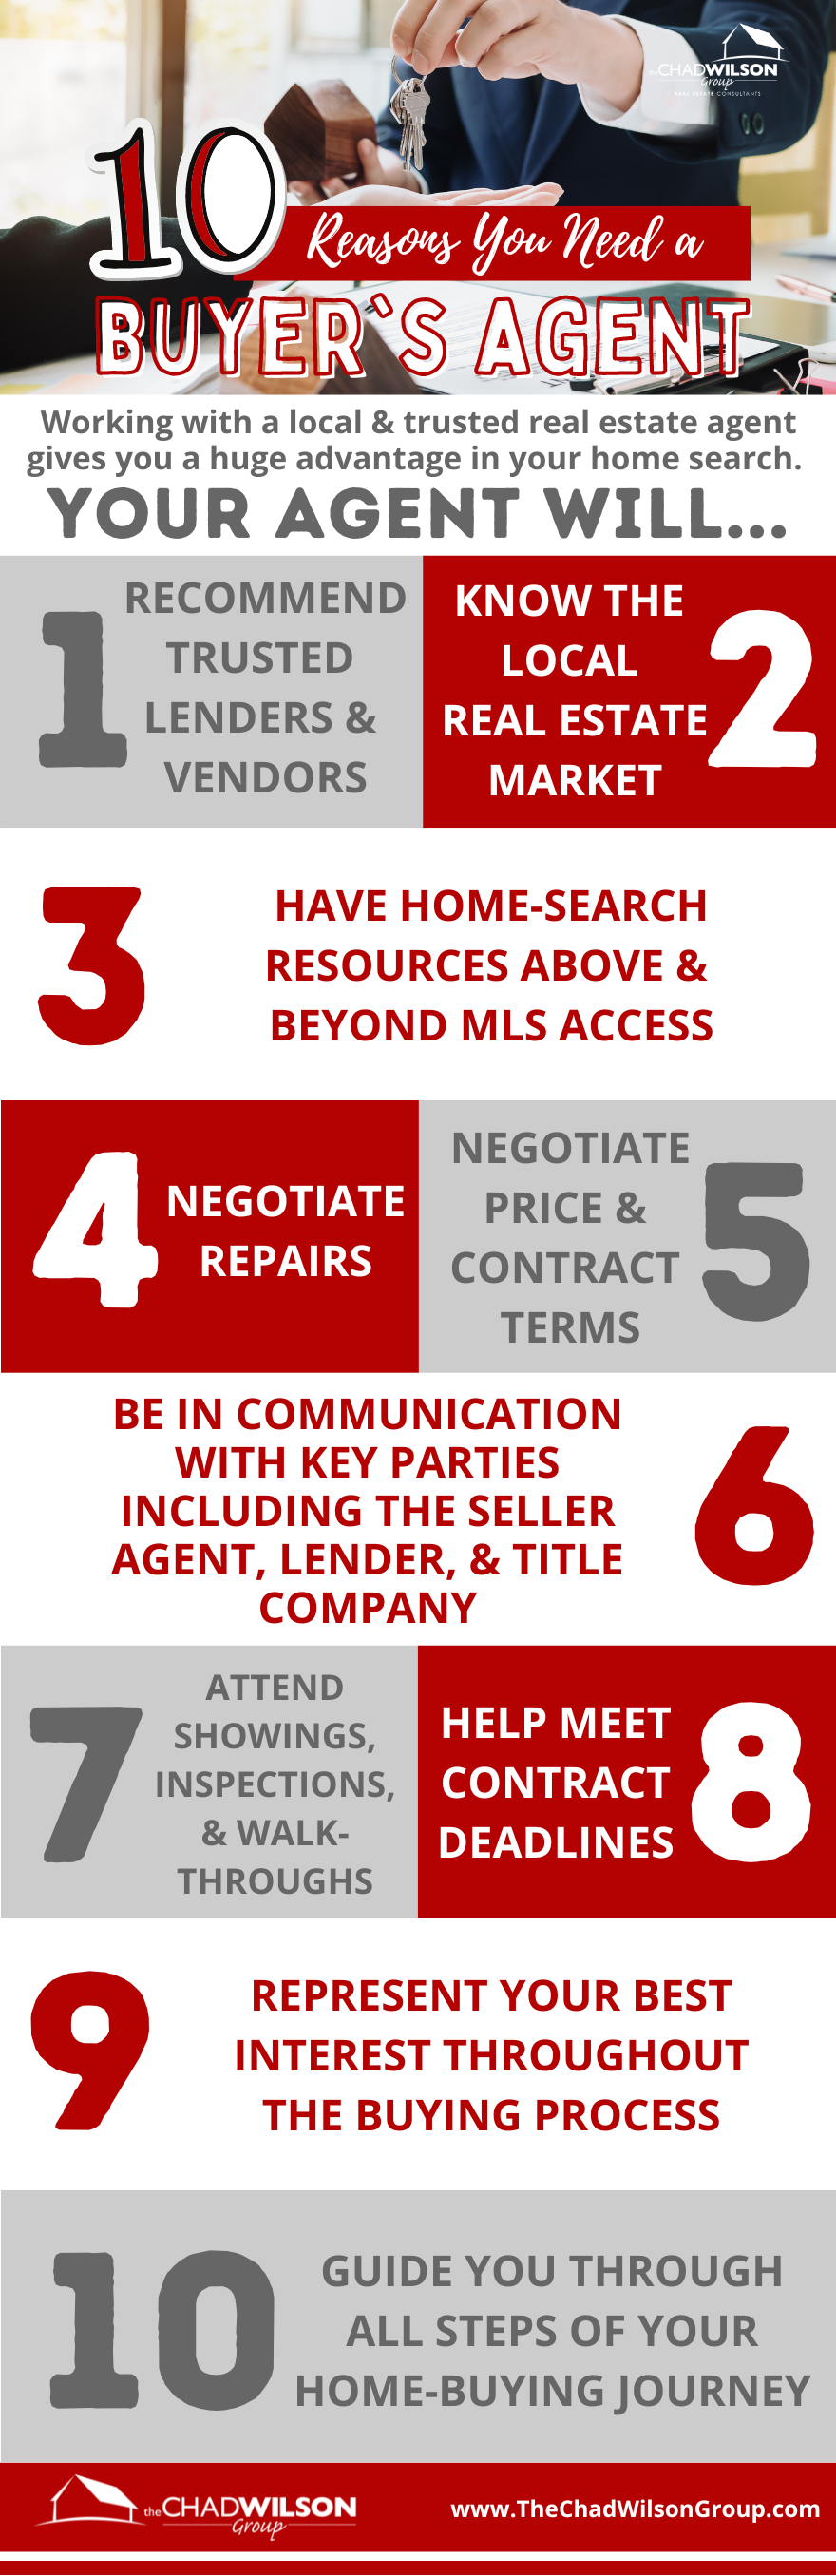 Why use a Buyers Agent